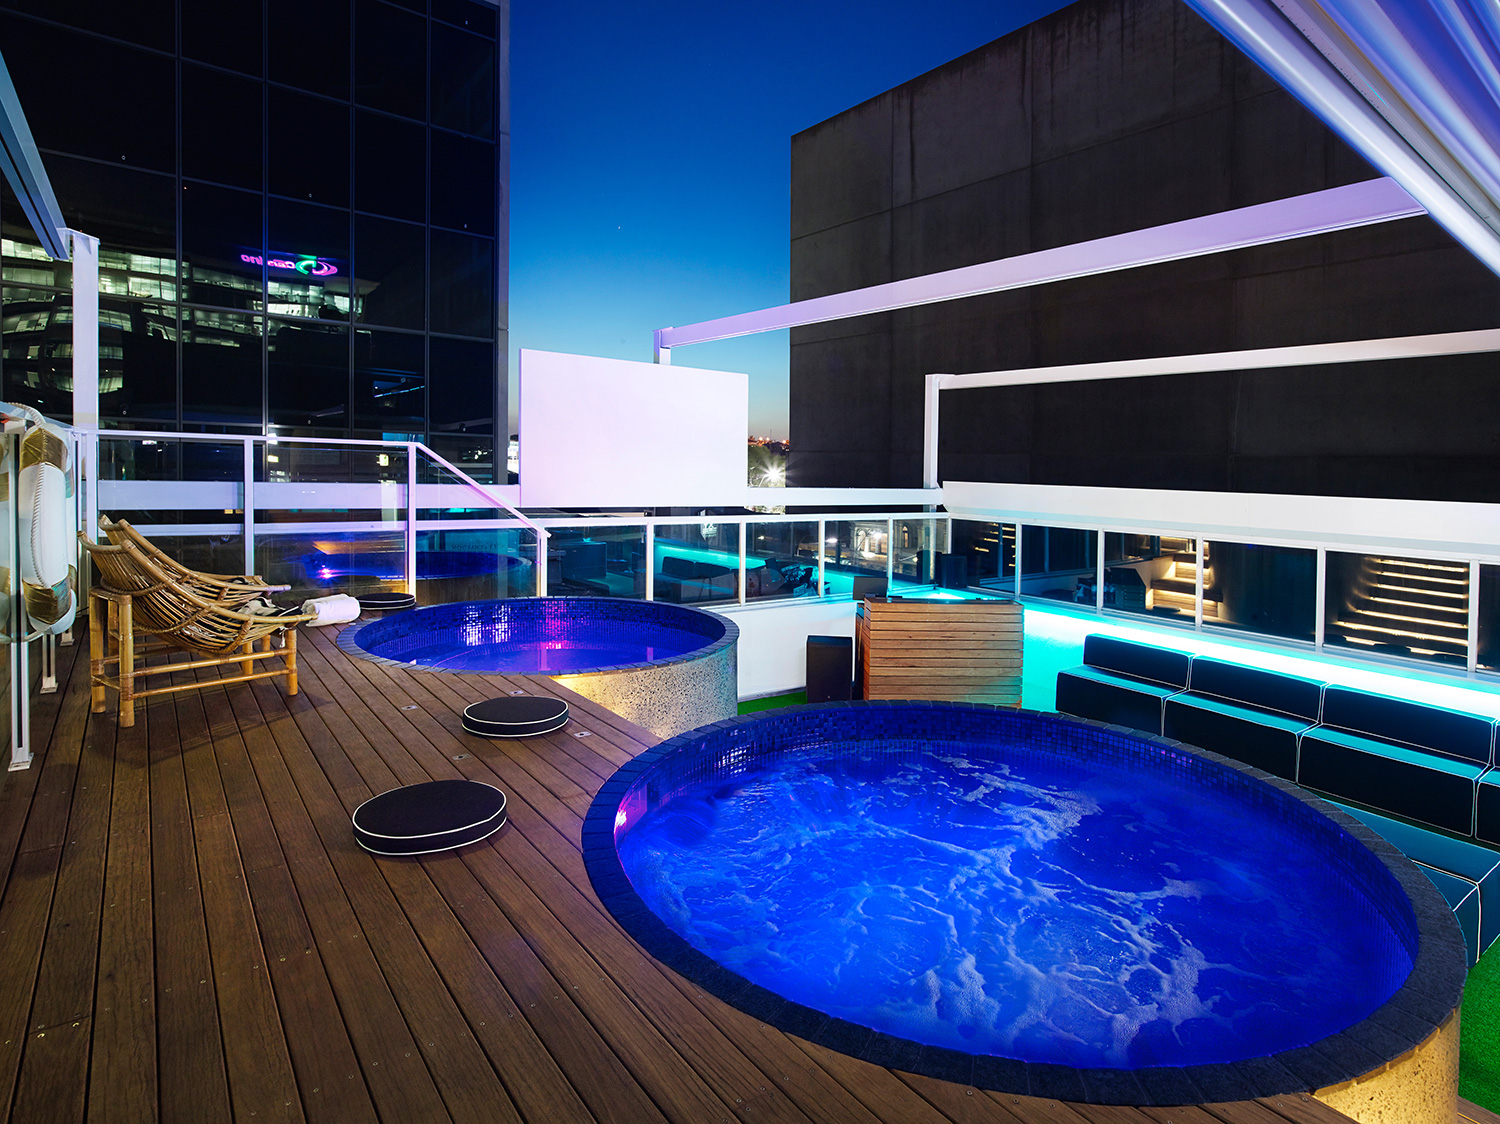 Limes Hotel - Rooftop Spa Pools